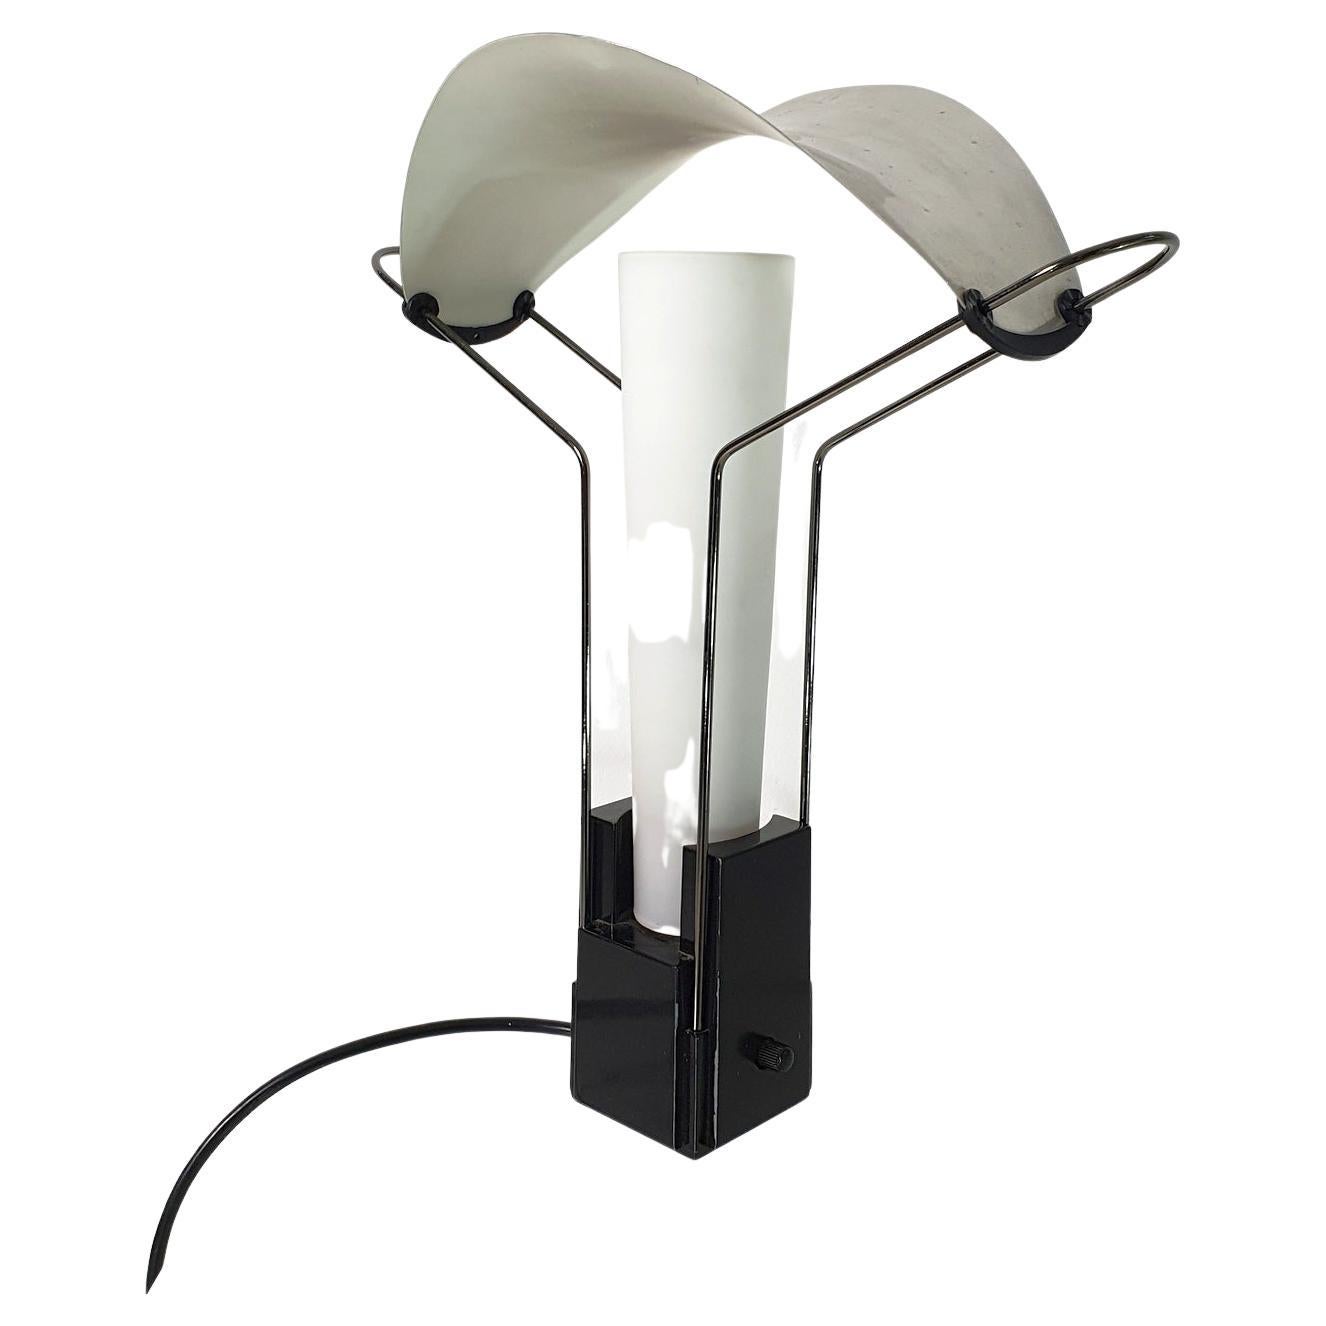 Square black base with a built-in dimmer switch with a polished curved lampshade and opal crystal glass diffuser. Chrome folded & curved rods. Socket works with E14 lightbulbs. European plug.